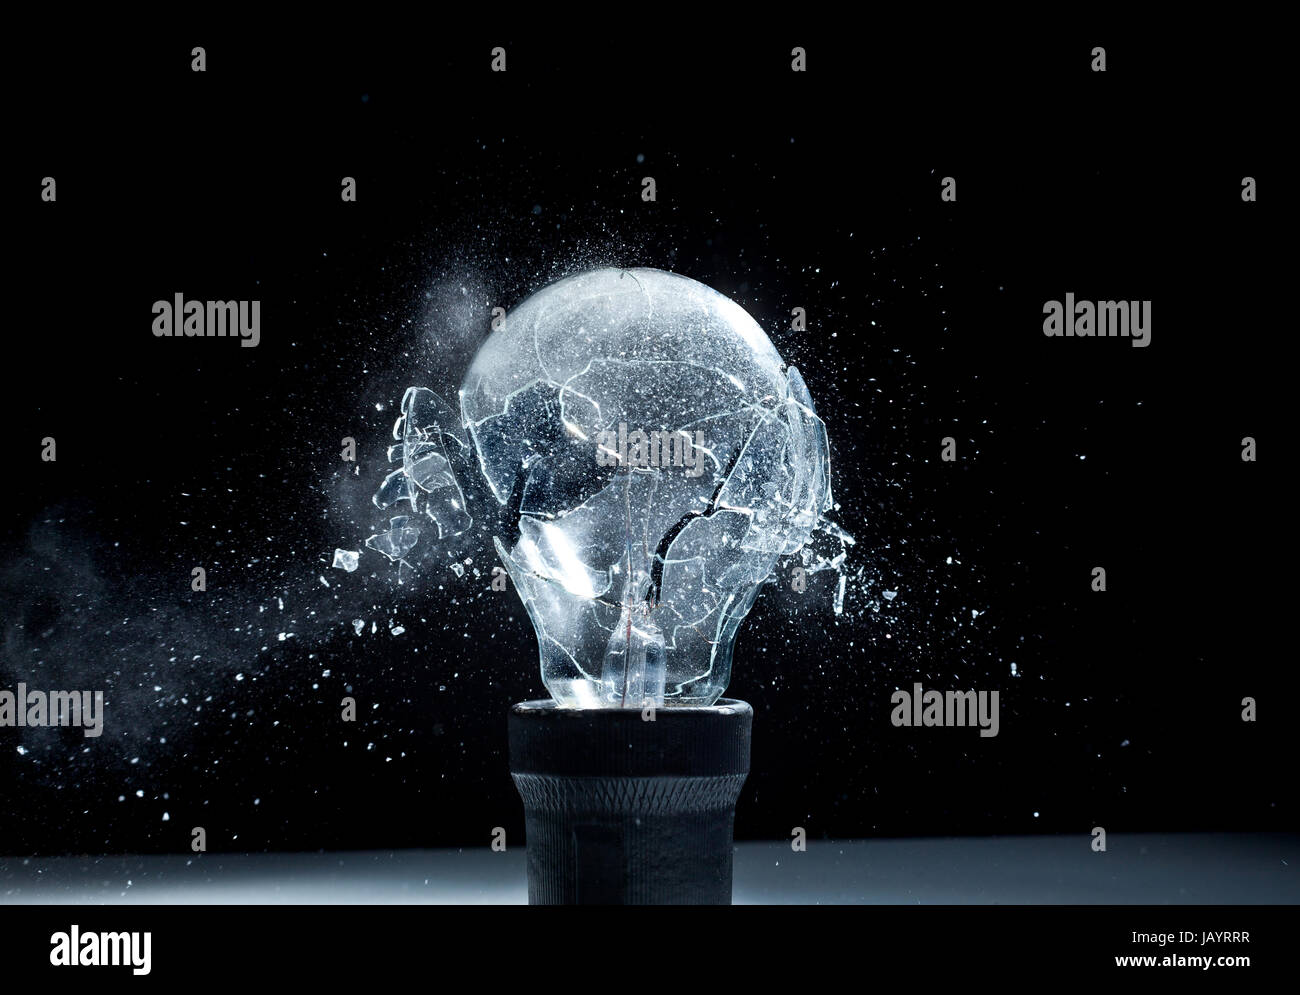 close up image of electric bulb explosion Stock Photo